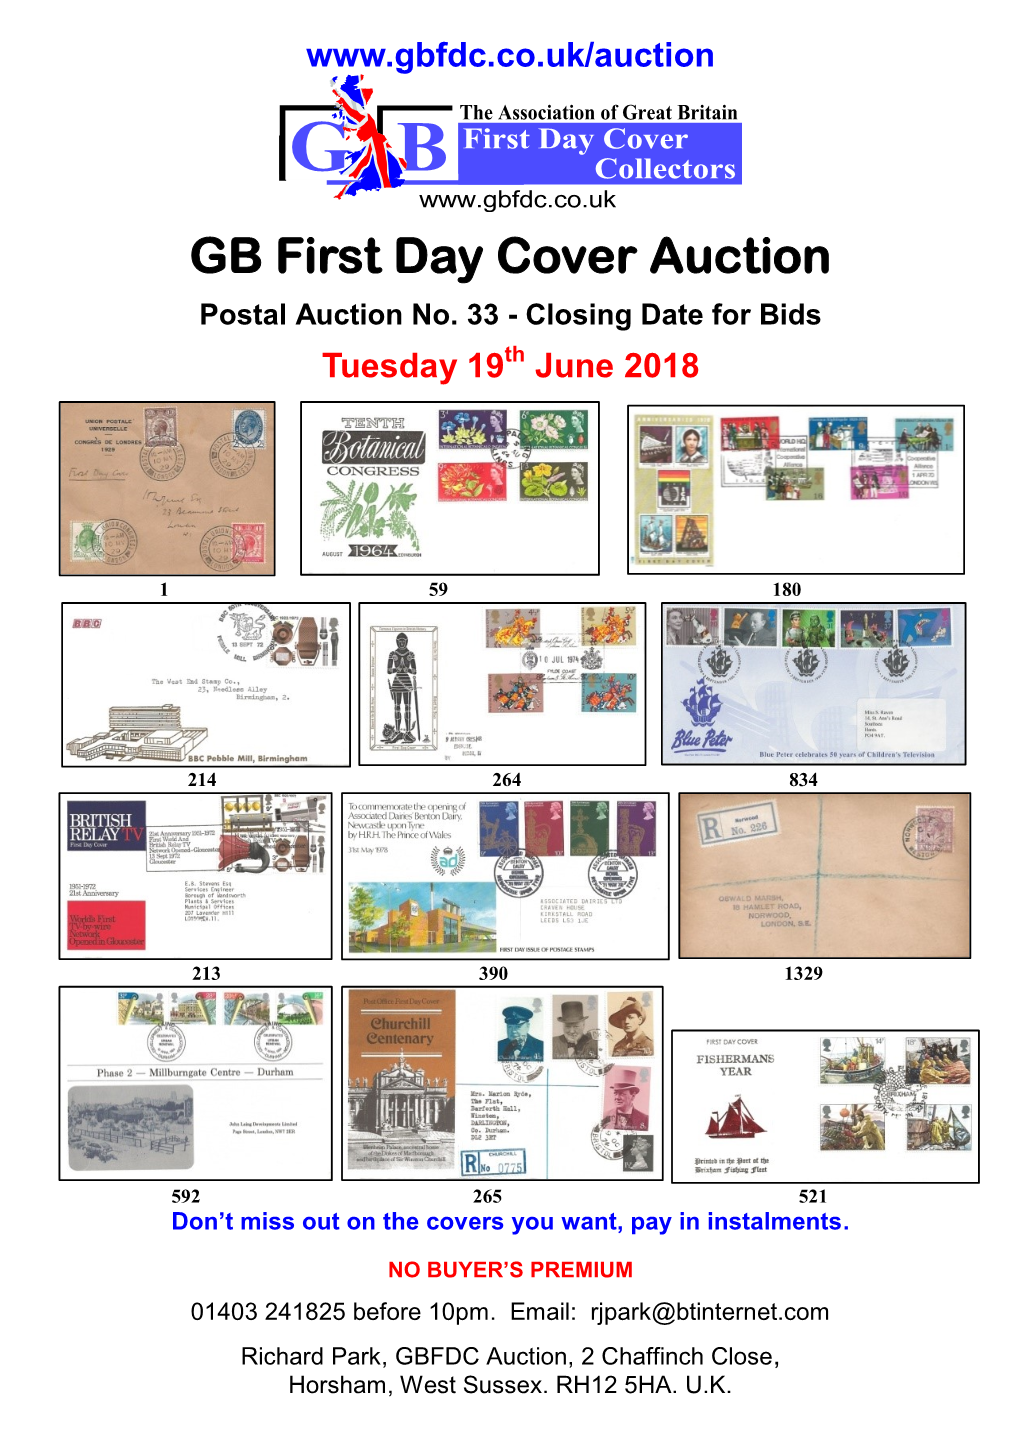 GB First Day Cover Auction Postal Auction No